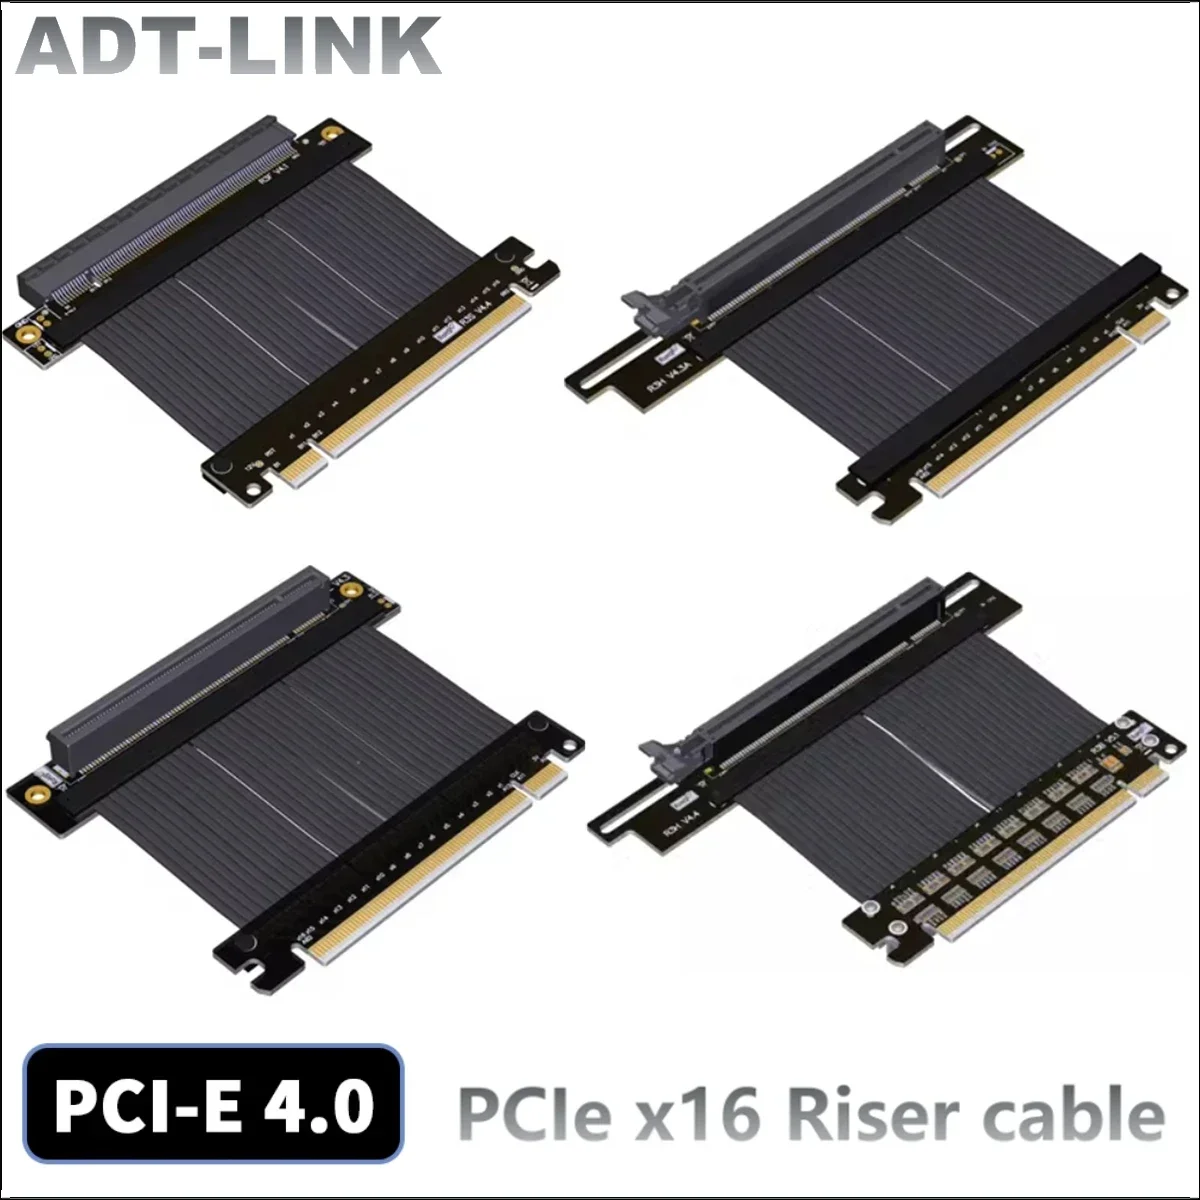 

ADT-Link High Speed PCI-e 4.0 x16 to x16 Riser Cable PCIe 4.0 Black/Silver GPU Gaming For ATX RTX 3090 Video Card Vertical Mount